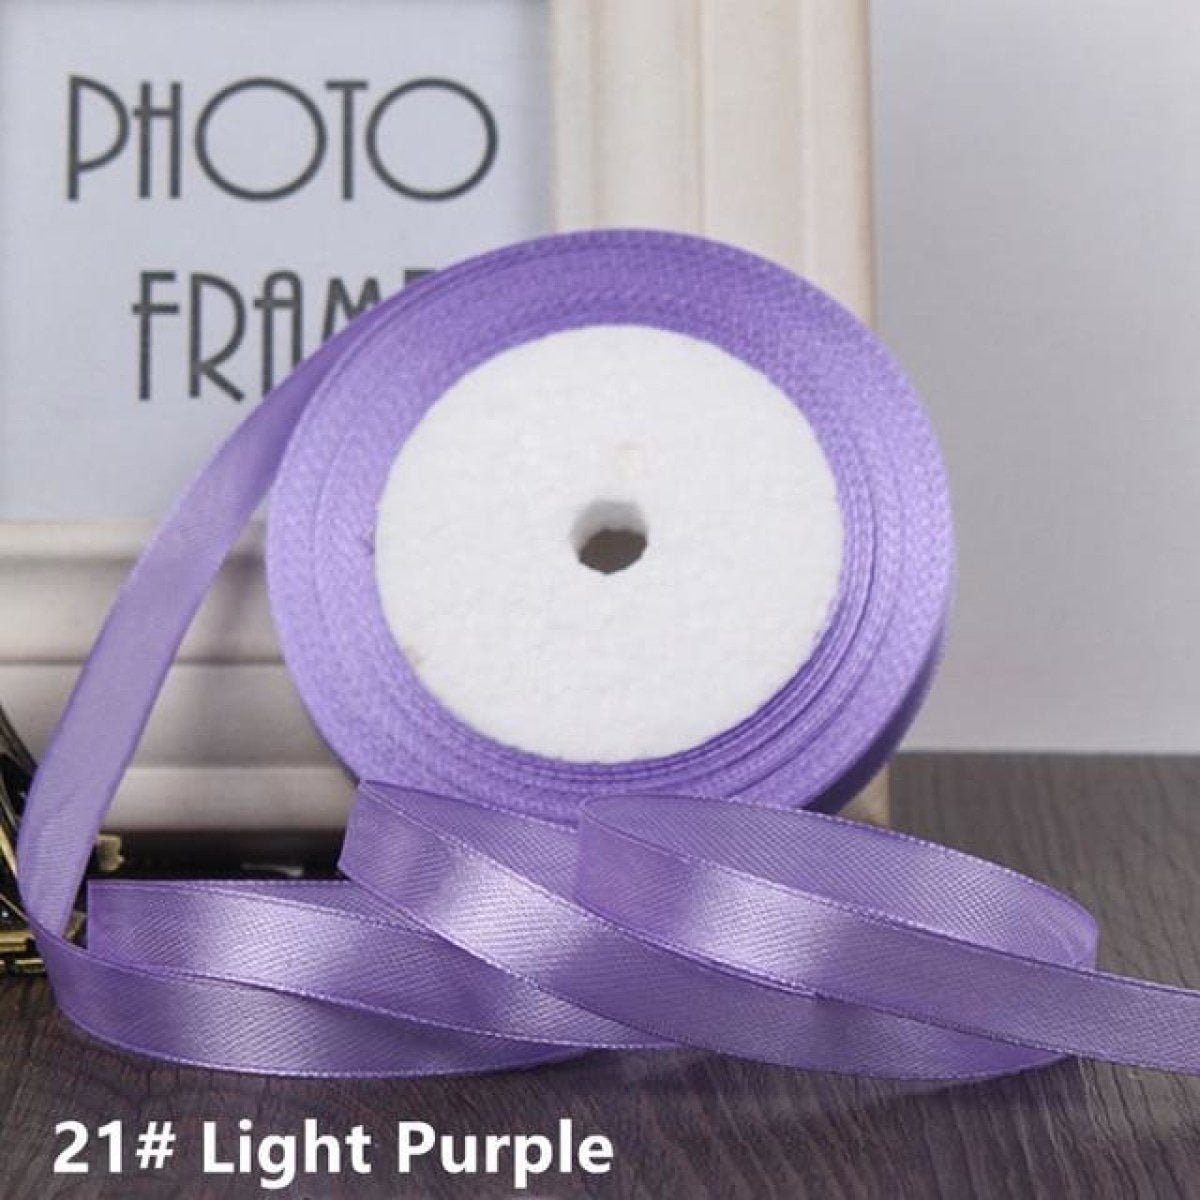 22m 10mm-15mm Polyester Ribbon for Crafts Bow Gift Wrapping Party Wedding Hair - Light Purple 10mm - - Asia Sell